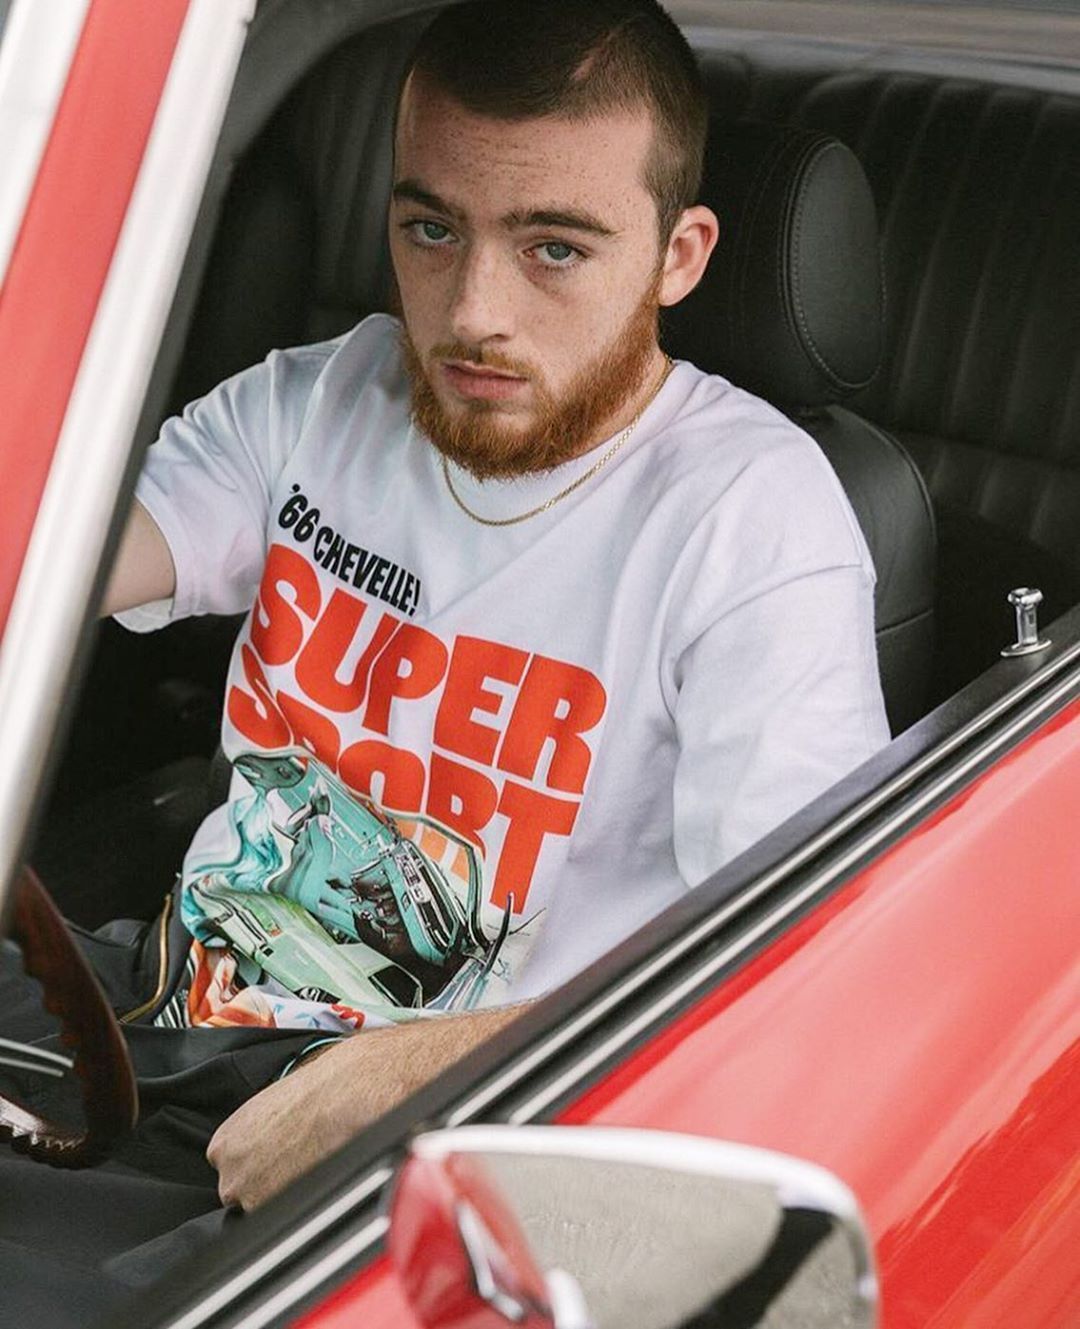 Mac Miller wearing a white tee with a graphic print on the front sitting in a car. - Angus Cloud